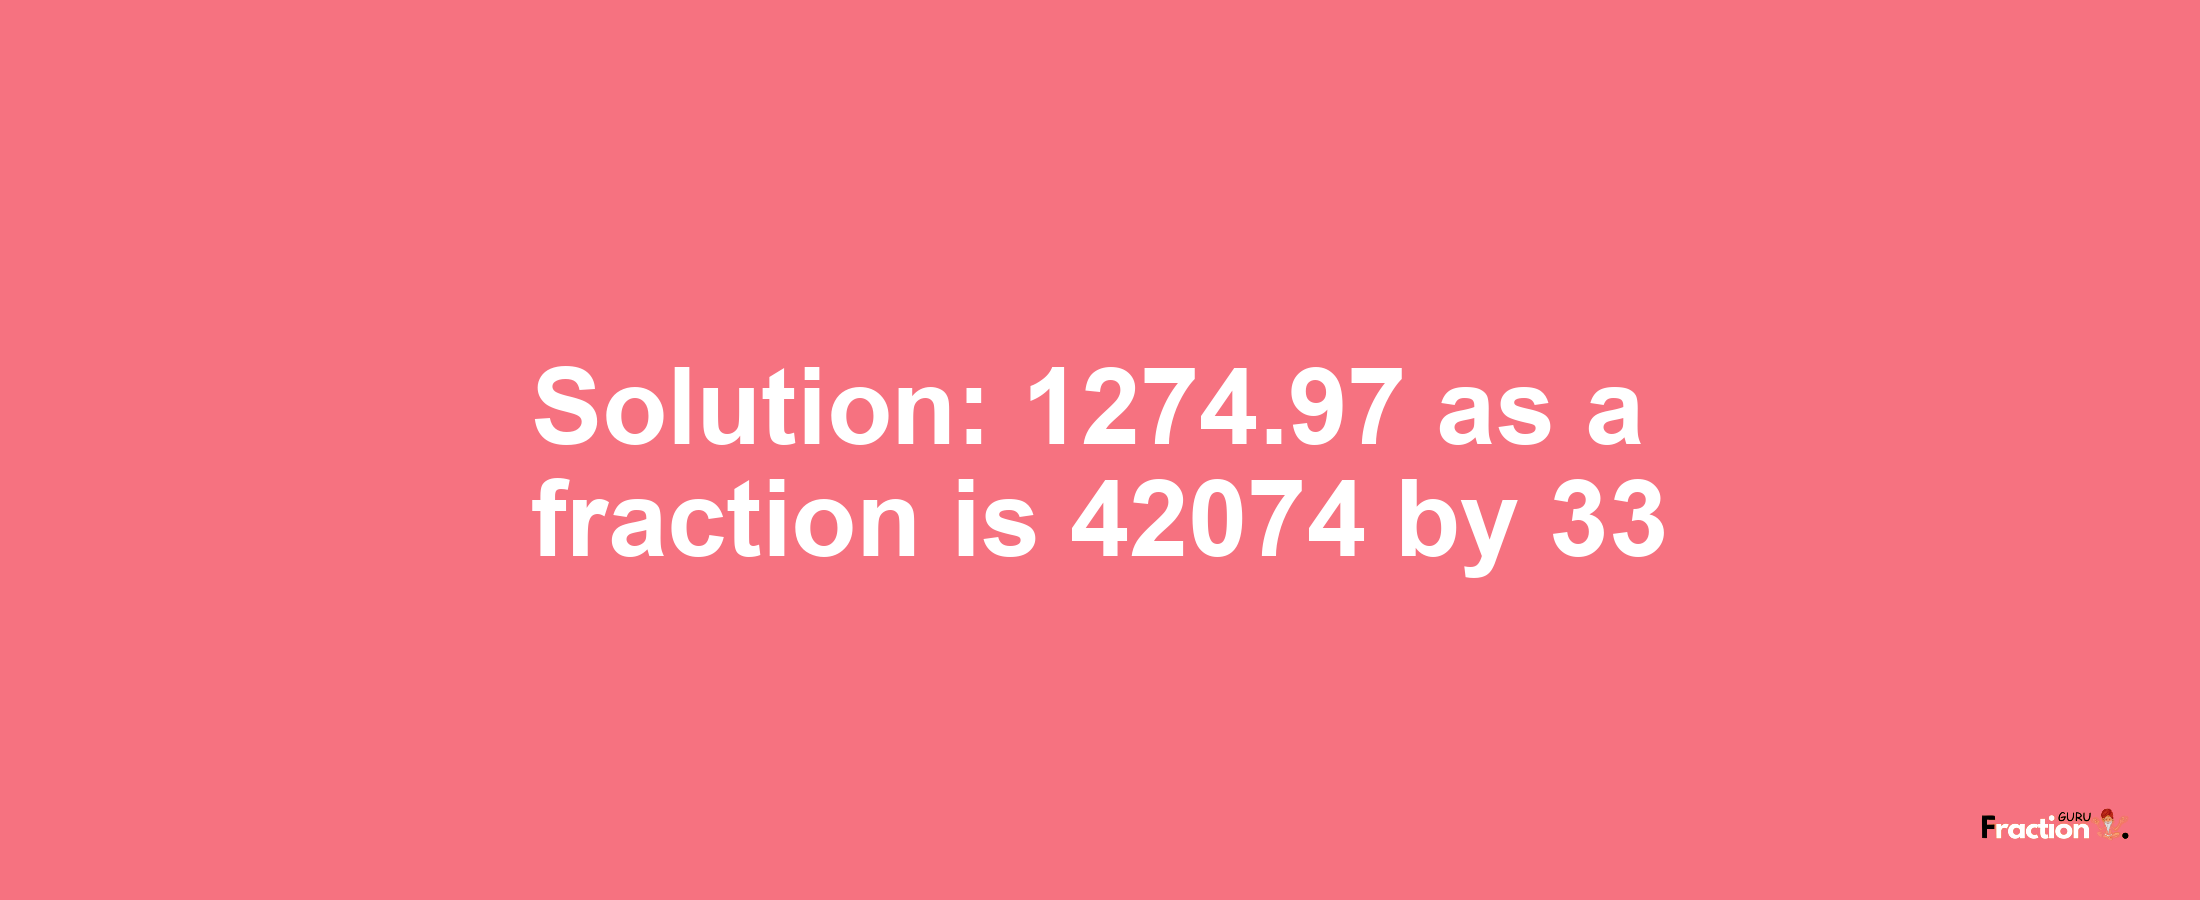 Solution:1274.97 as a fraction is 42074/33